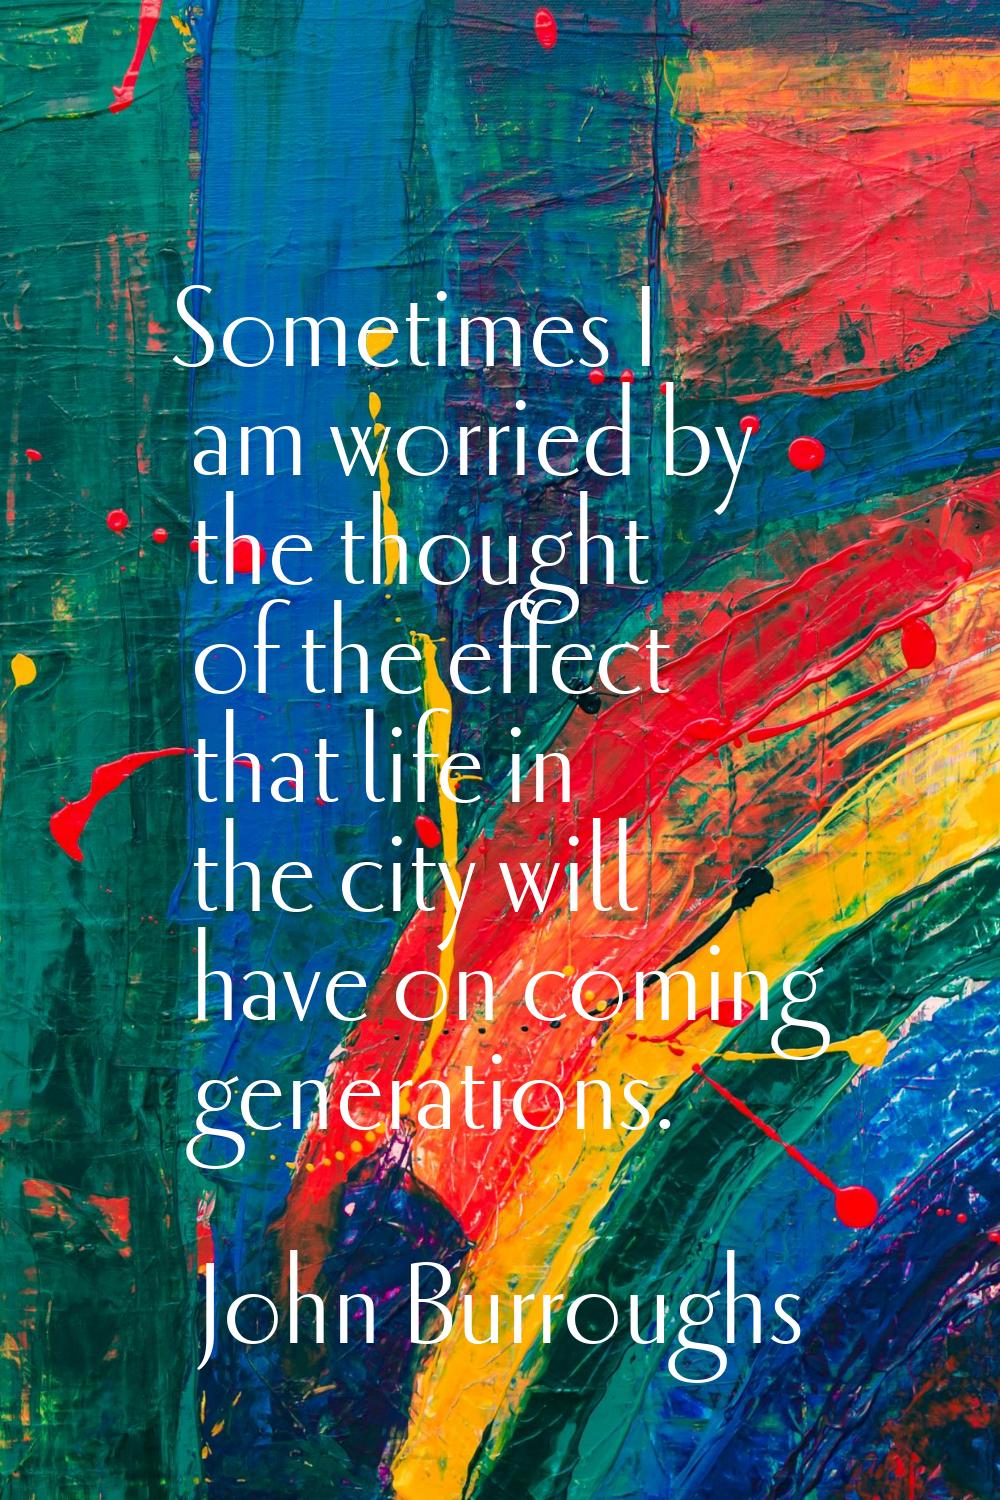 Sometimes I am worried by the thought of the effect that life in the city will have on coming gener